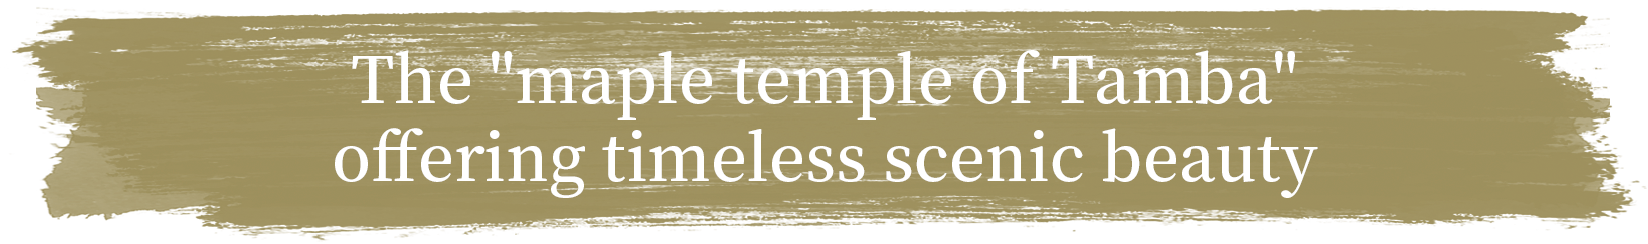 The "maple temple of Tamba	" offering timeless scenic beauty